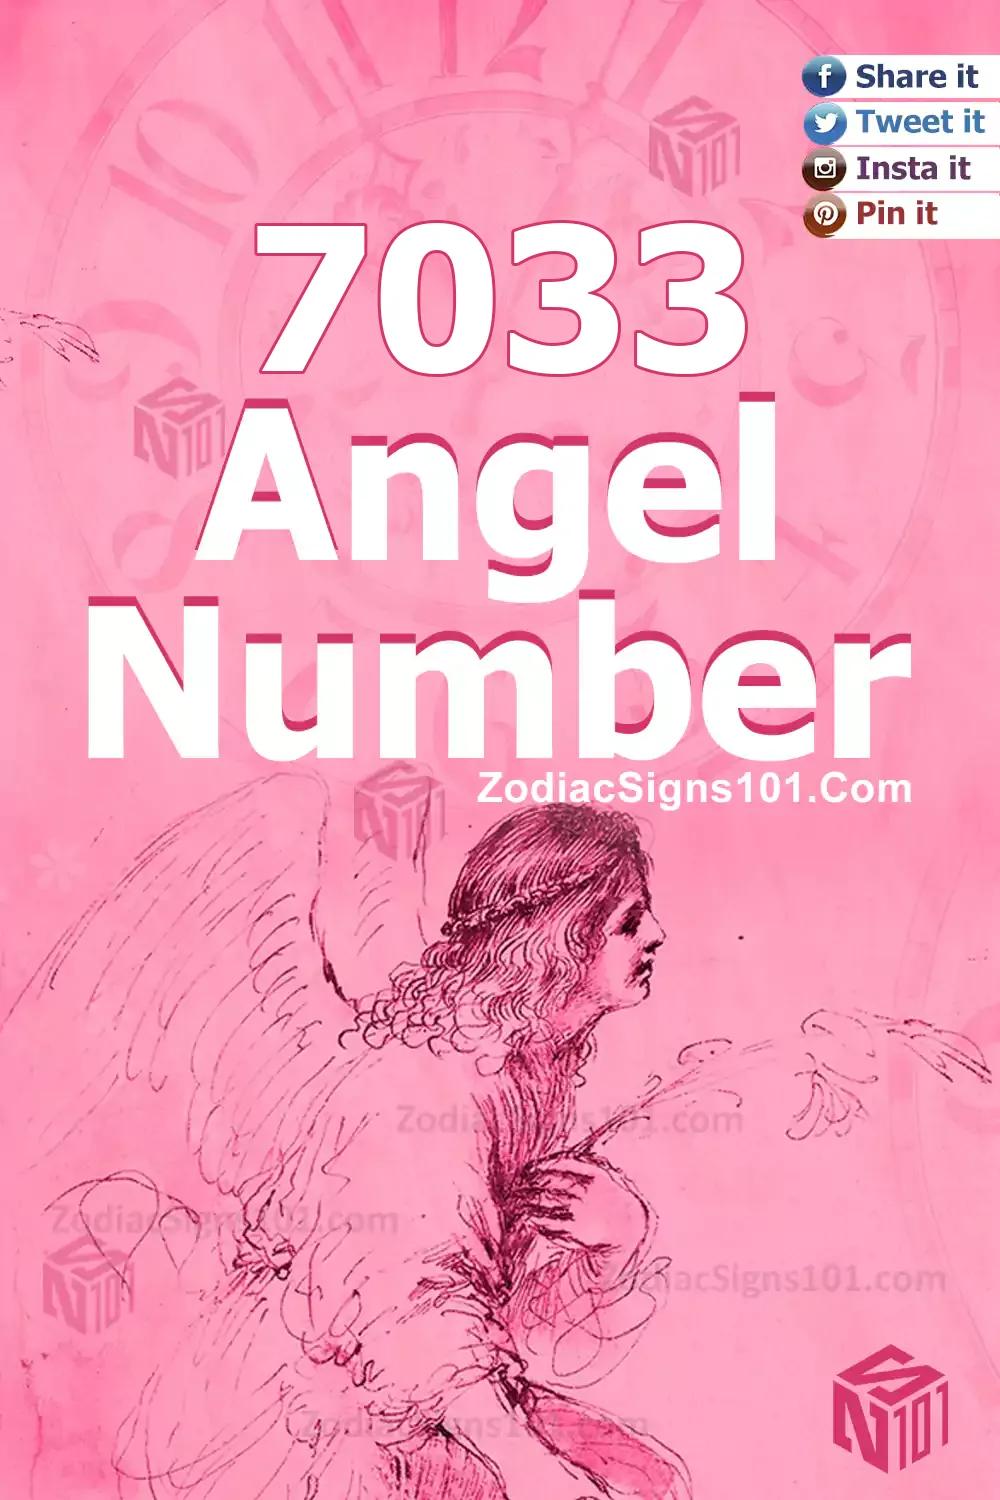 7033 Angel Number Meaning